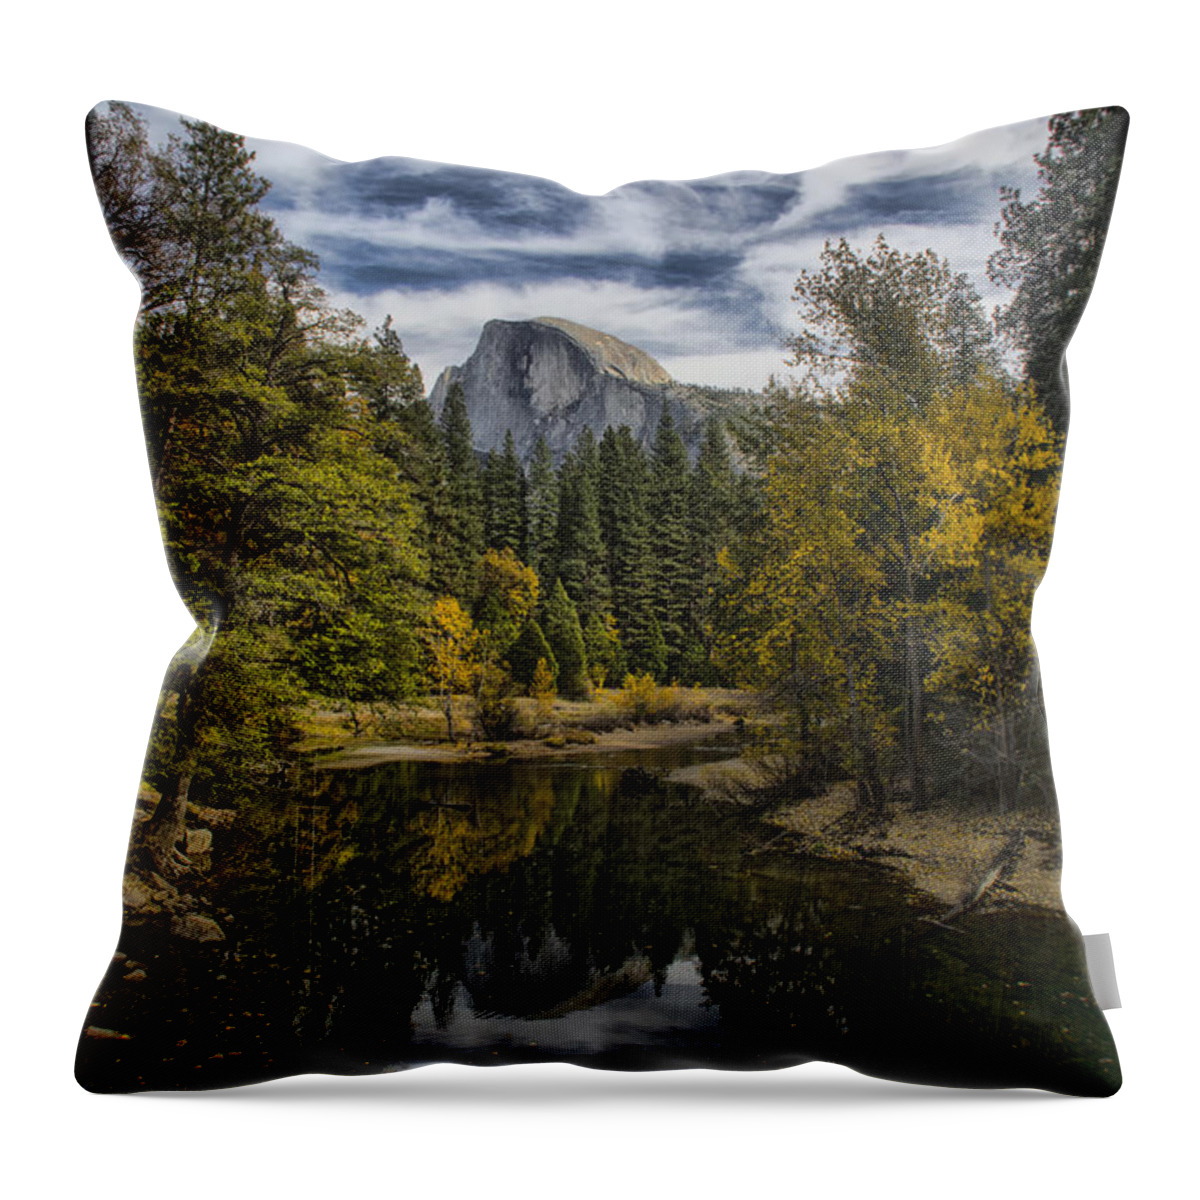 Yosemite Throw Pillow featuring the photograph Half Dome Reflection by Erika Fawcett